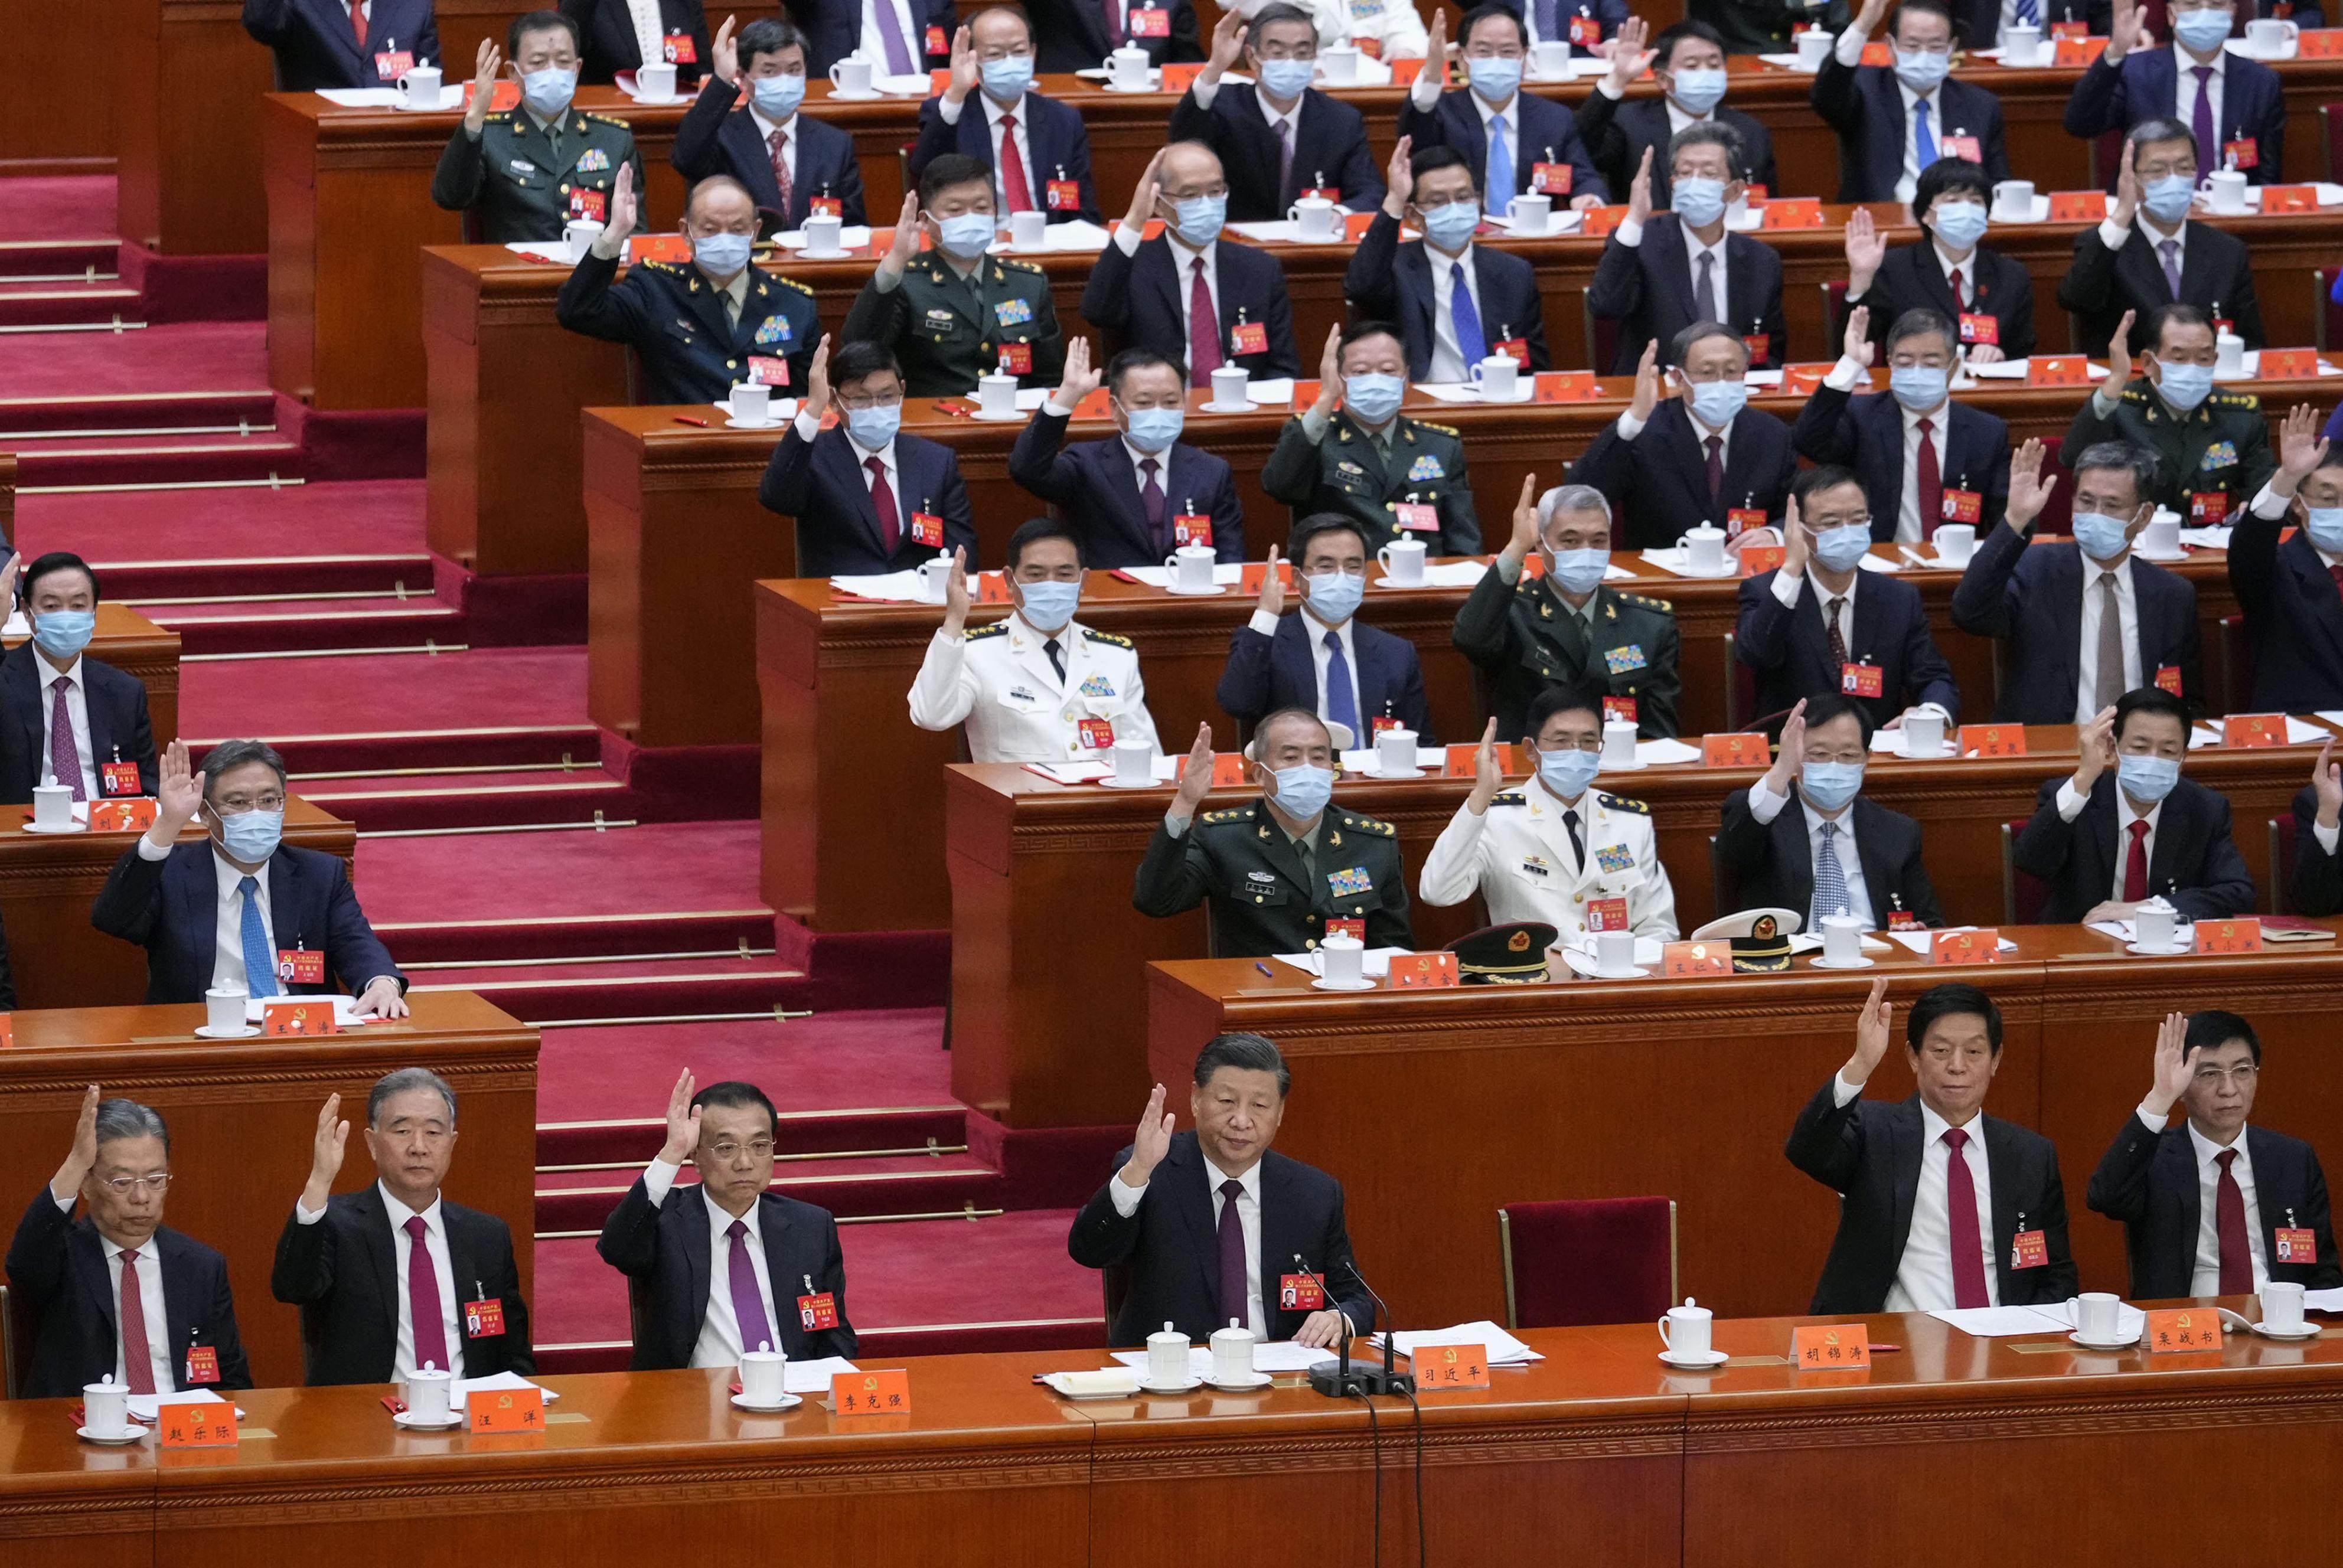 Chinese President Xi Jinping shown during the Communist Party’s 20th national congress on October 22, 2022 in Beijing. Stock markets fell after Xi secured a third term. Photo: Kyodo